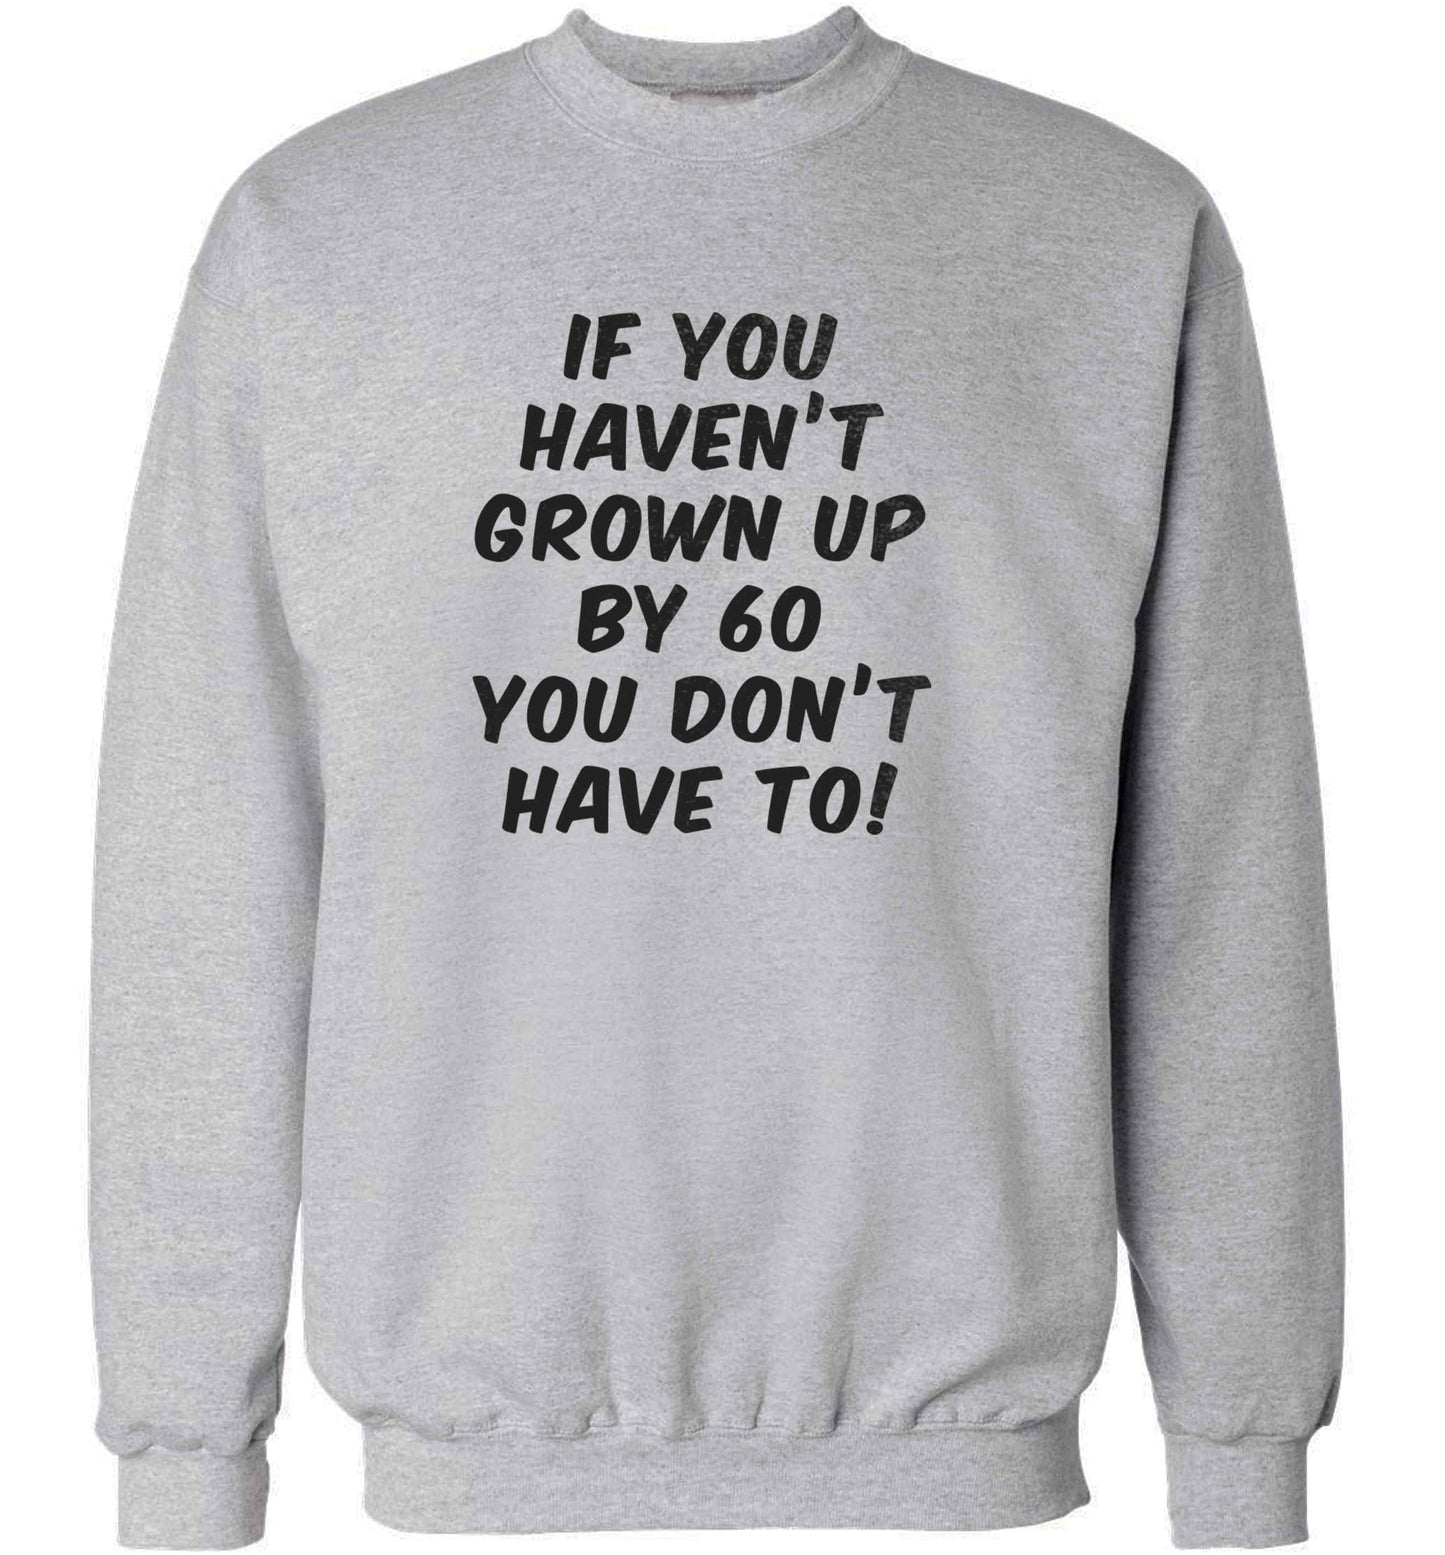 If you haven't grown up by sixty you don't have to adult's unisex grey sweater 2XL